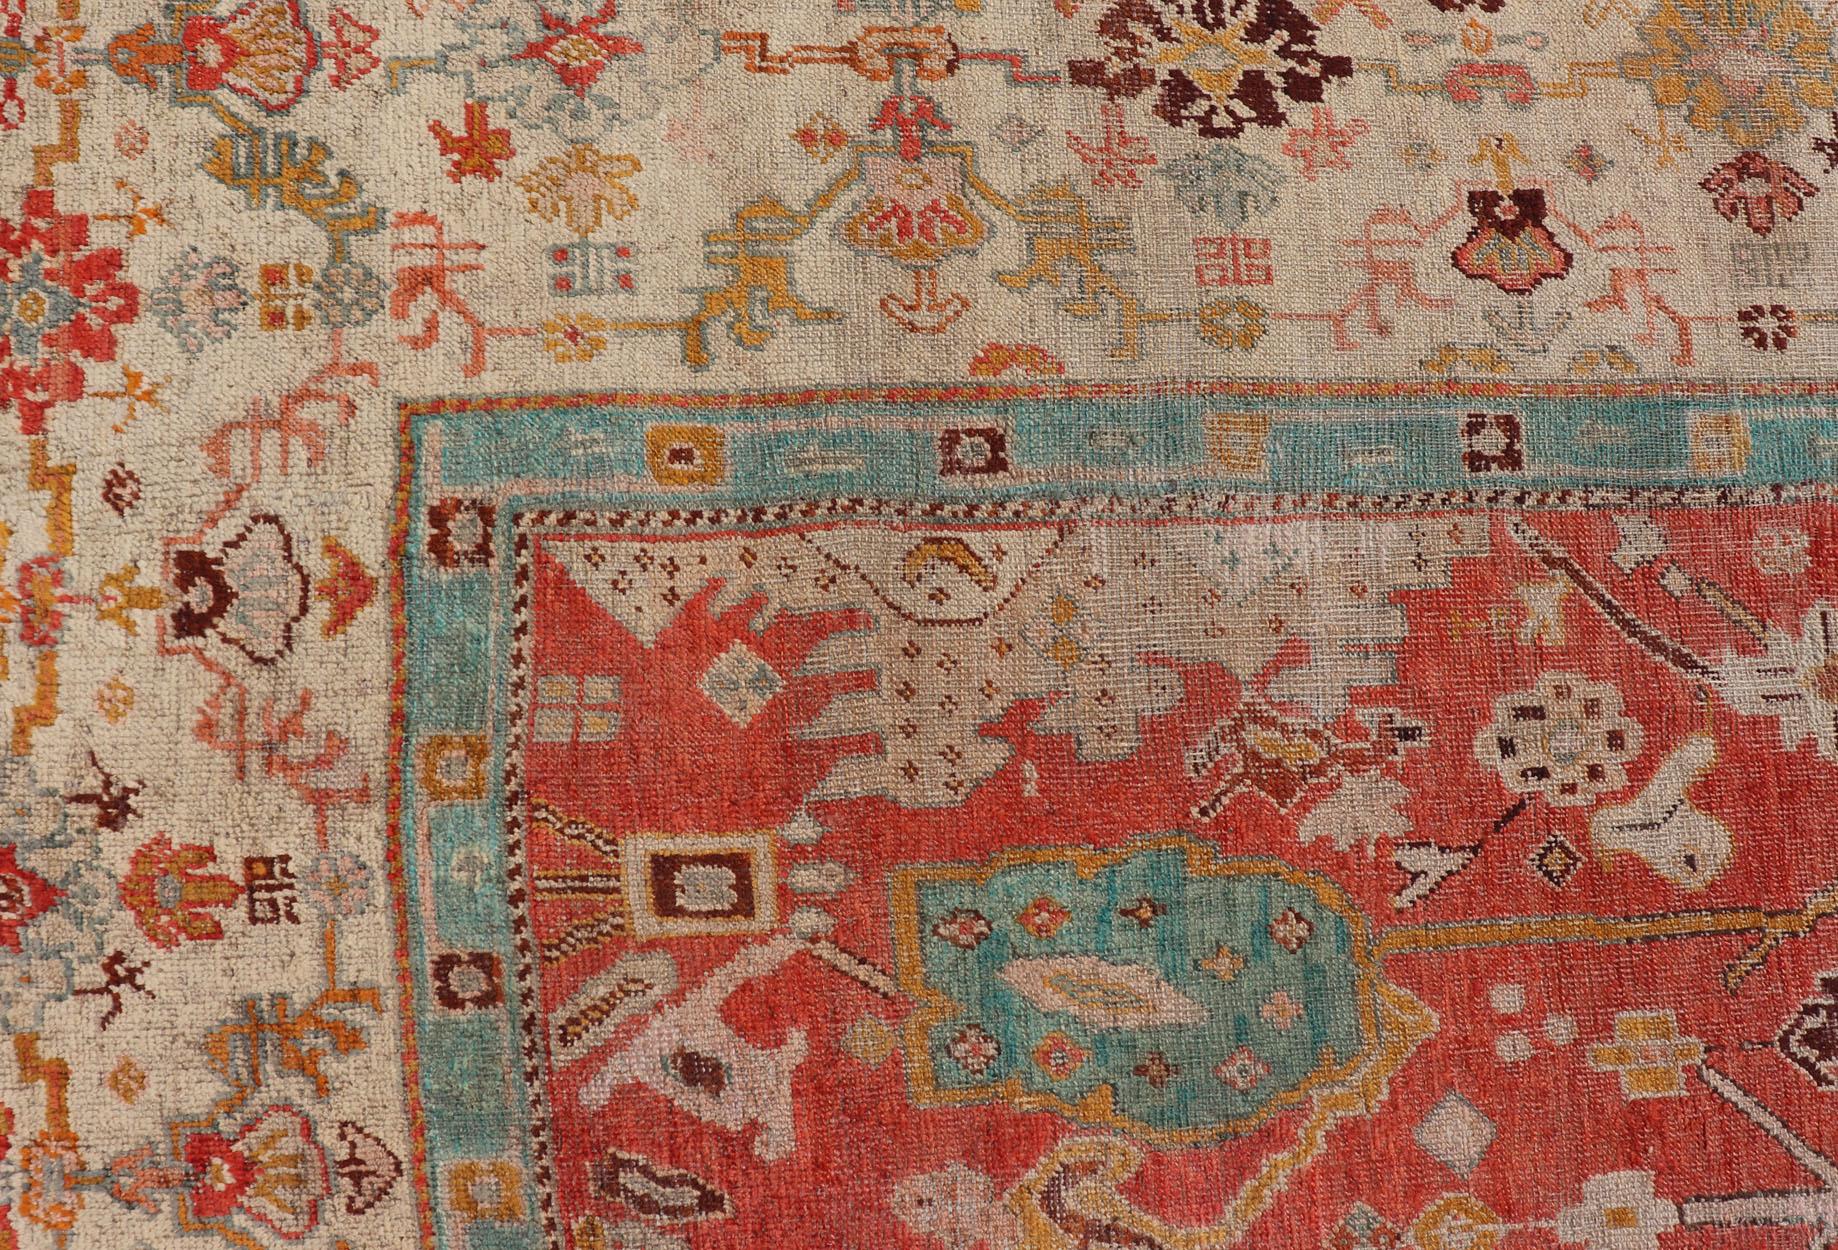 Antique Turkish Oushak In Tribal Motifs in Soft Coral, Blue, Marigold, and Cream For Sale 1